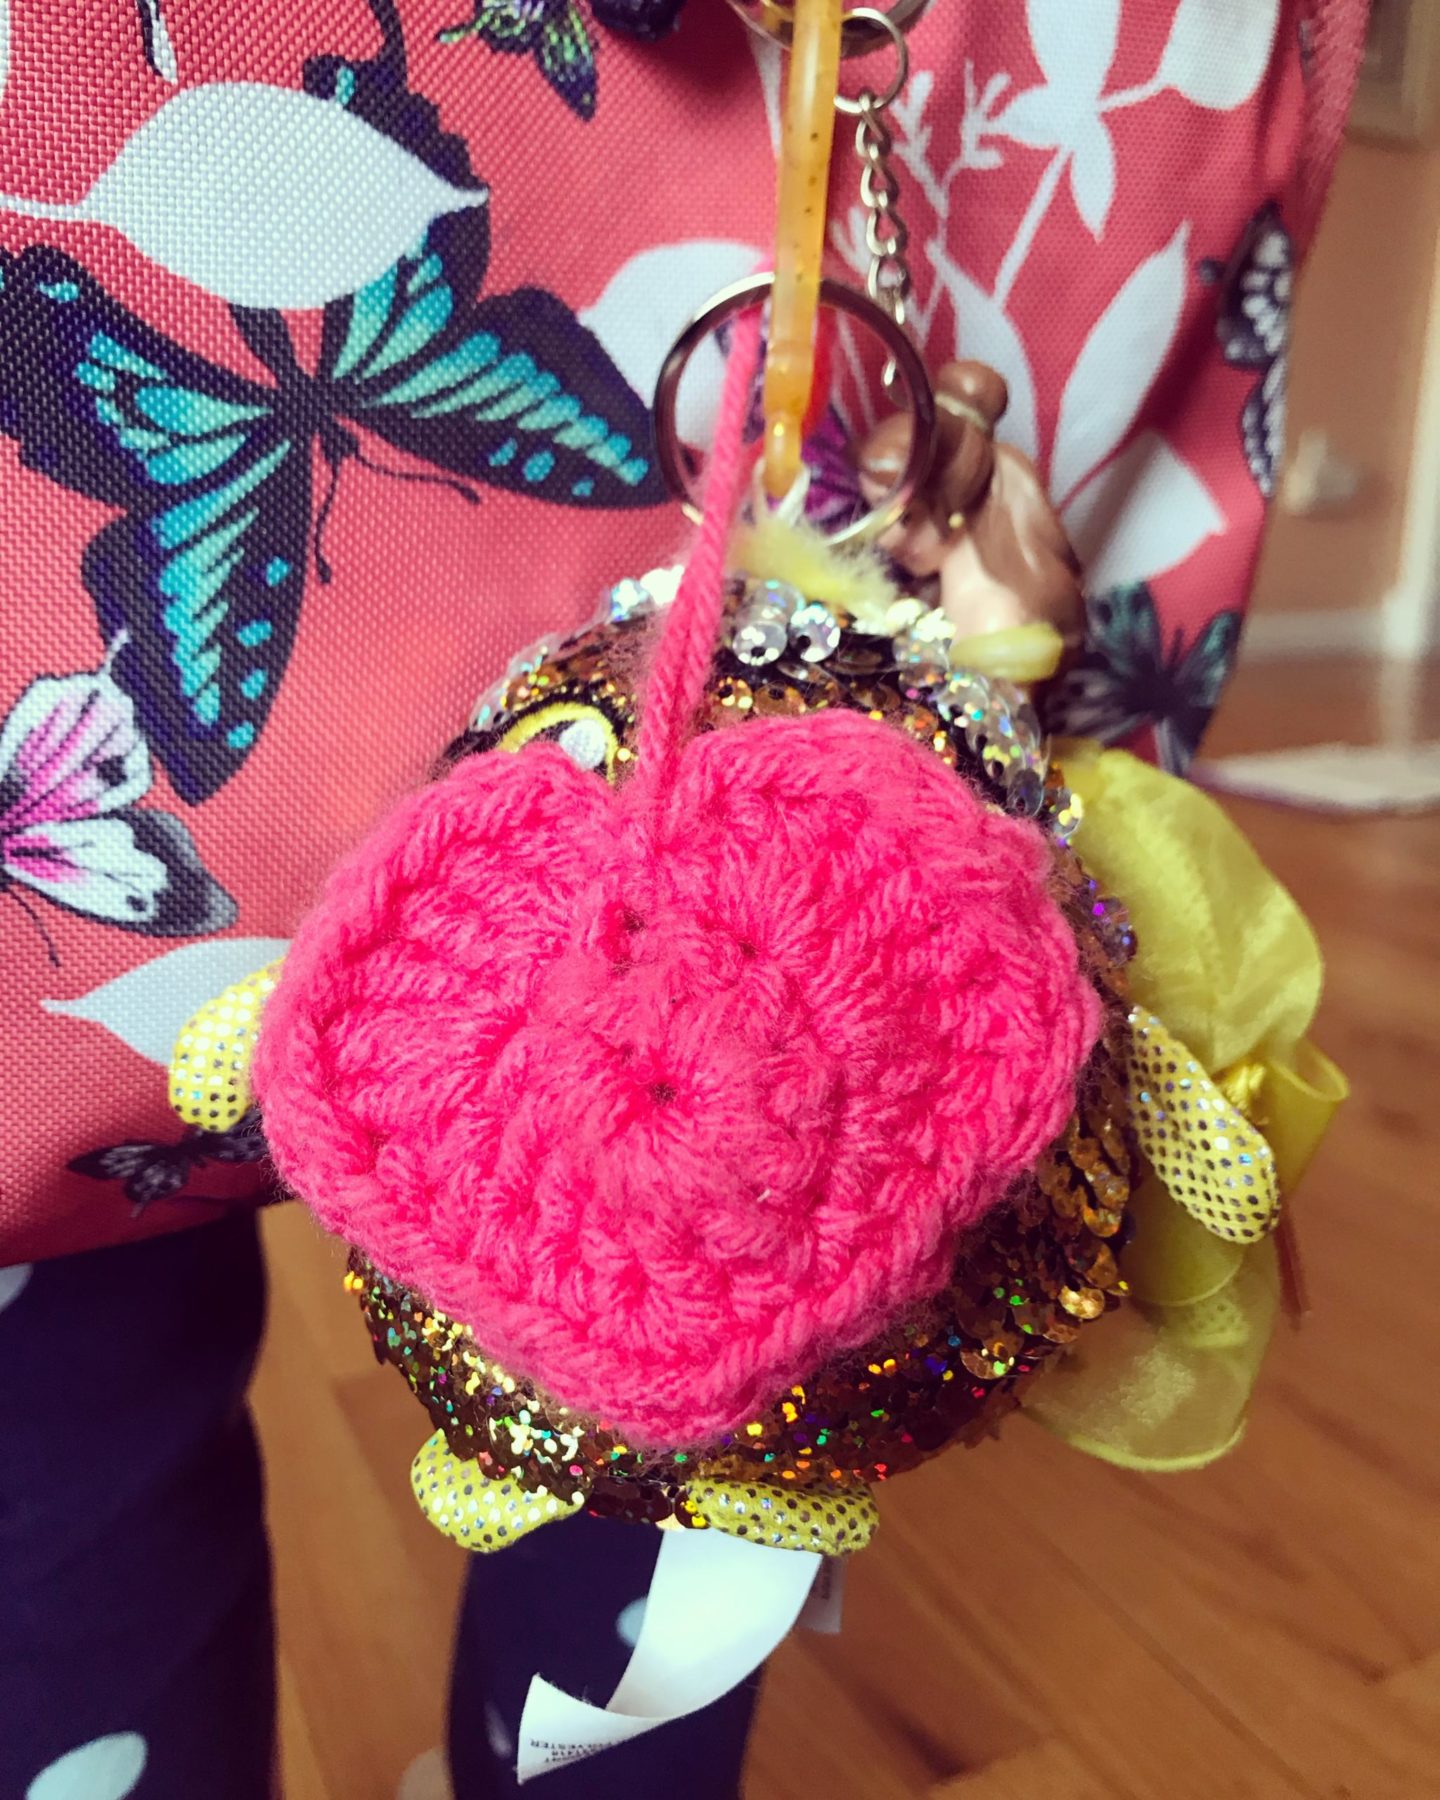 Crochet a key chain for someone special!